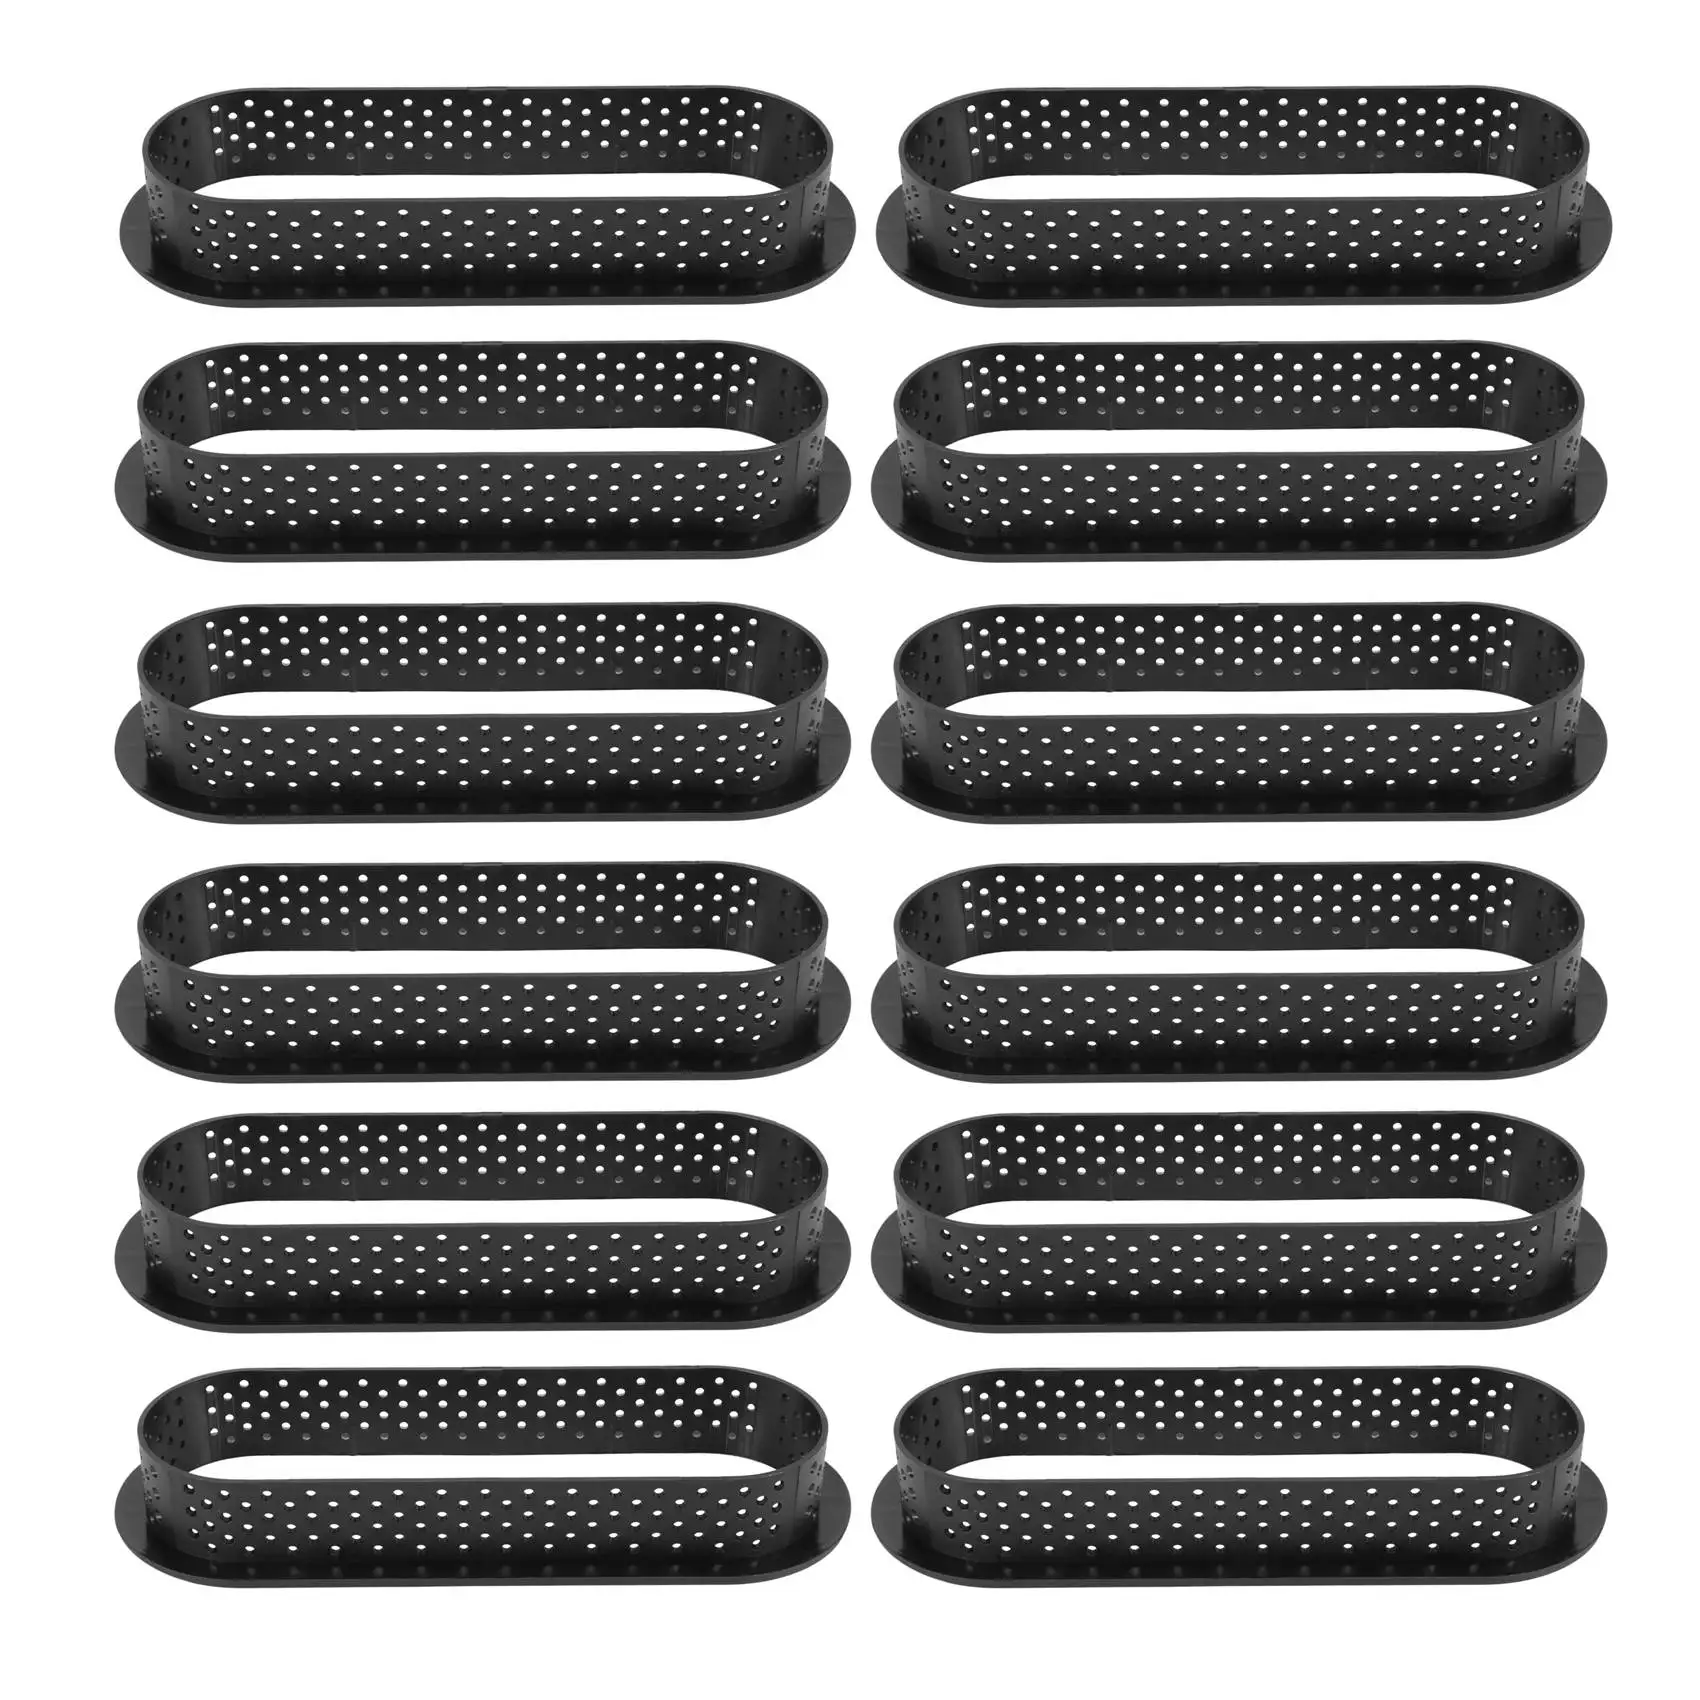 

12 Pieces Oval Tart Rings Heat-Resistant Perforated Cake Mousse Ring Non Stick Bakeware Tart Mini Cake Mold Cake Rings